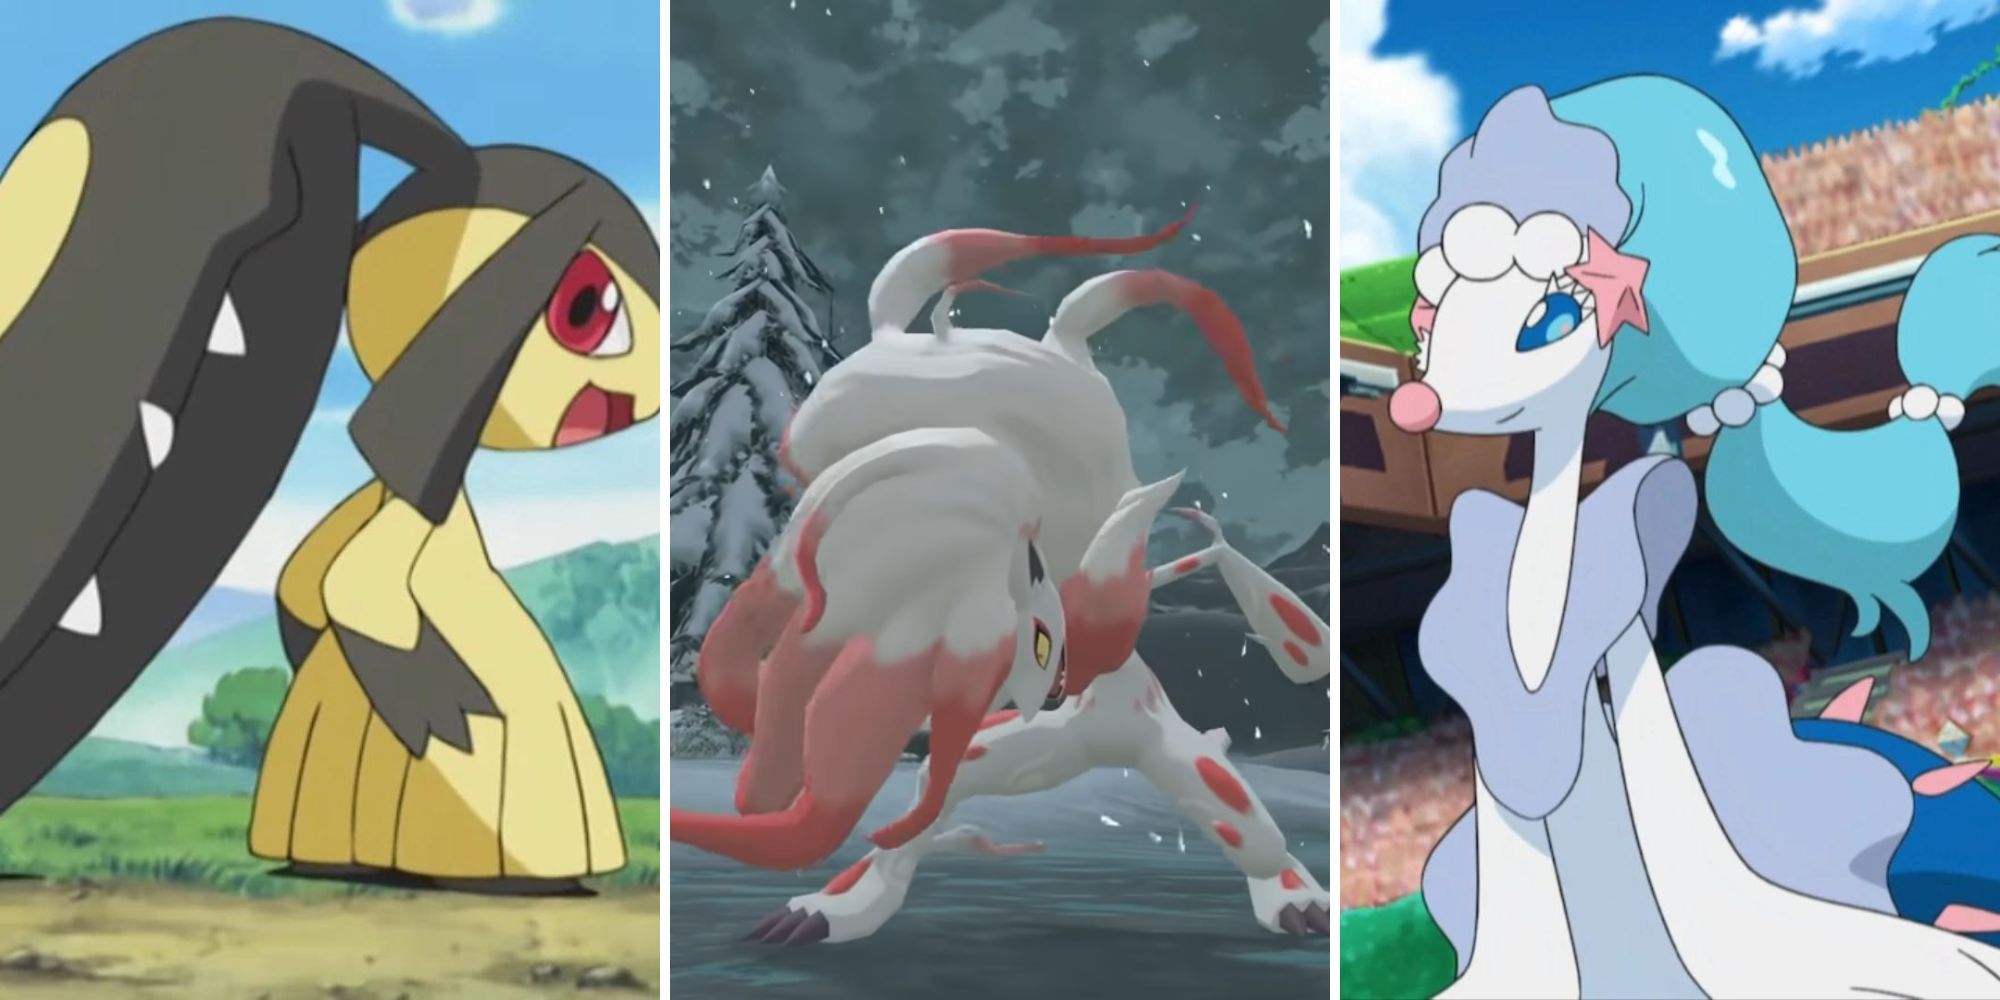 Mawile stands on a dirt path, Hisuian Zoroark roars in the snow, Primarinaprepares for battle in a stadium